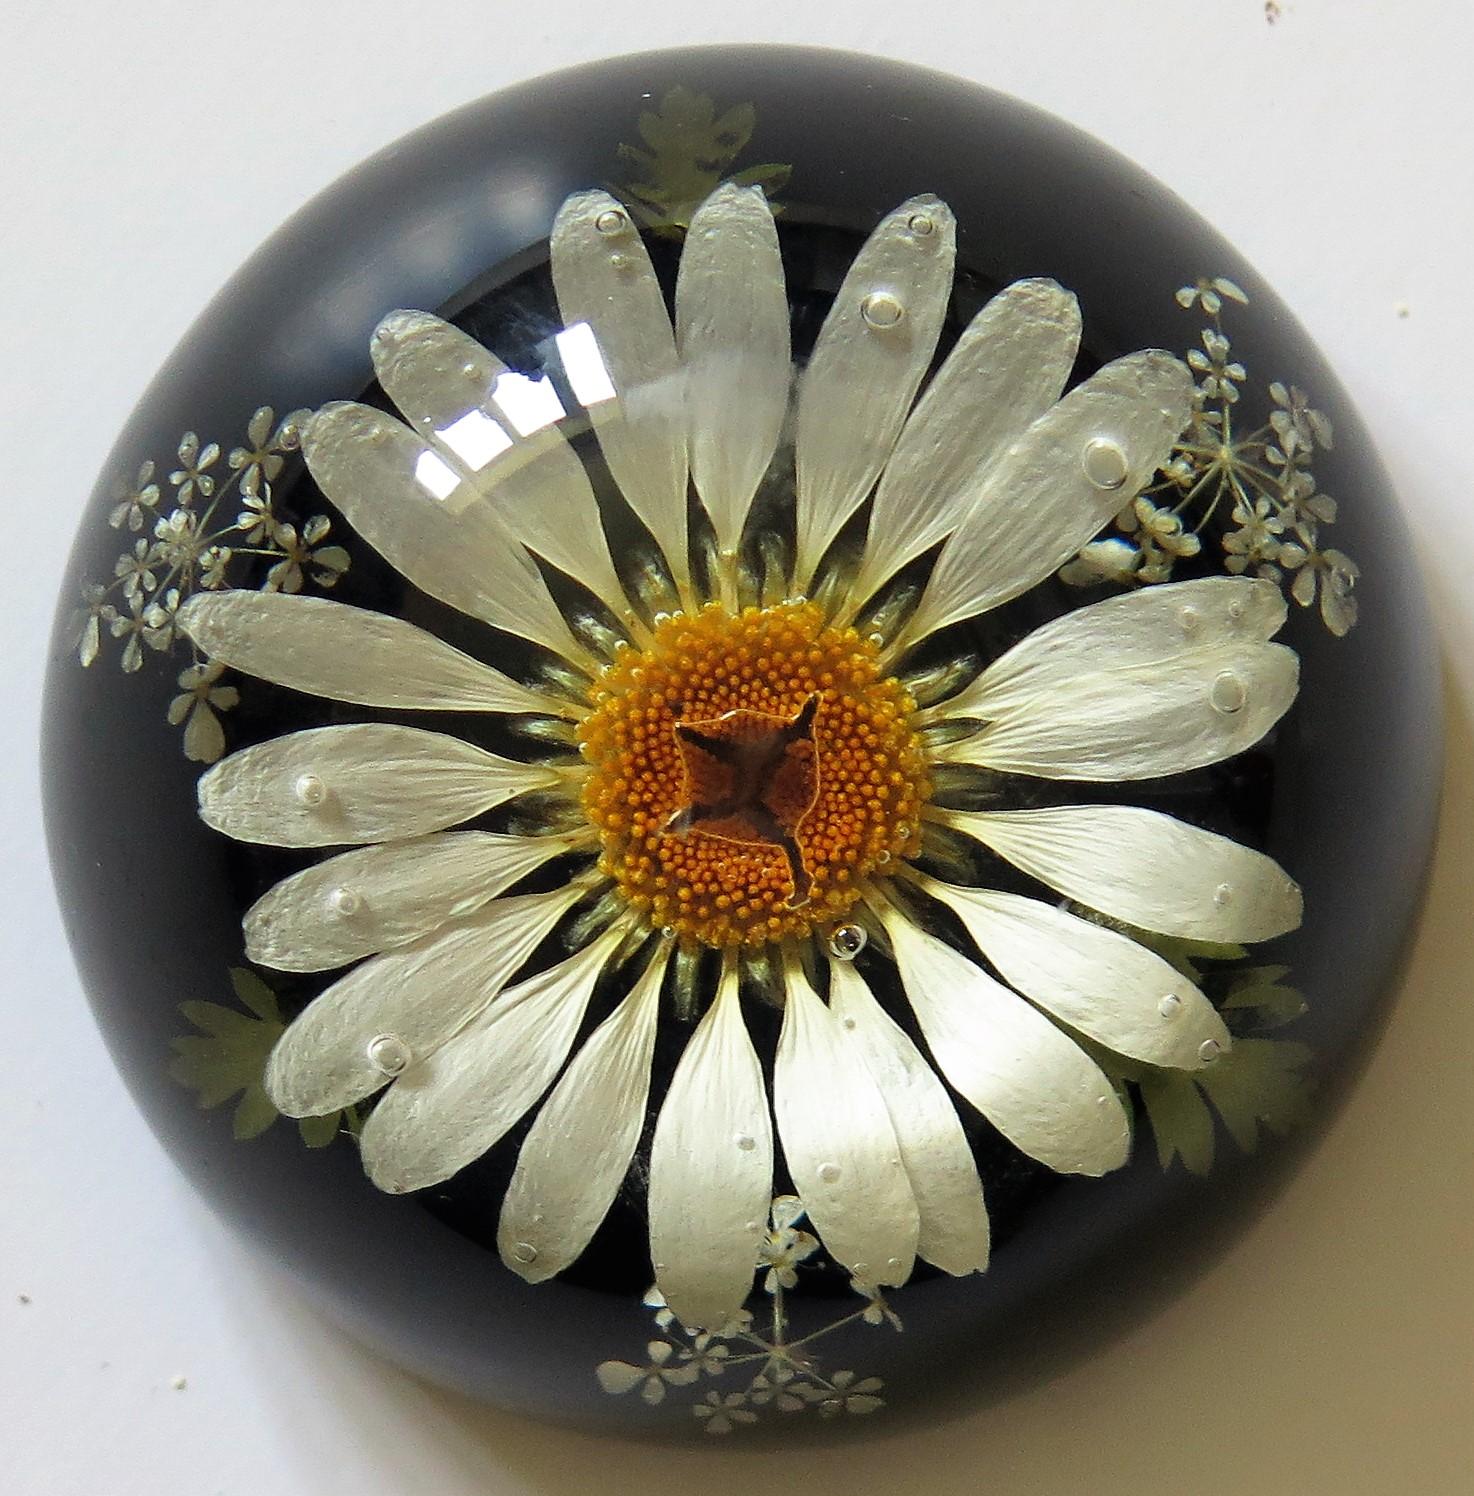 Daisy Paperweight Handmade with Real Flowers by Sarah Rogers, English 6